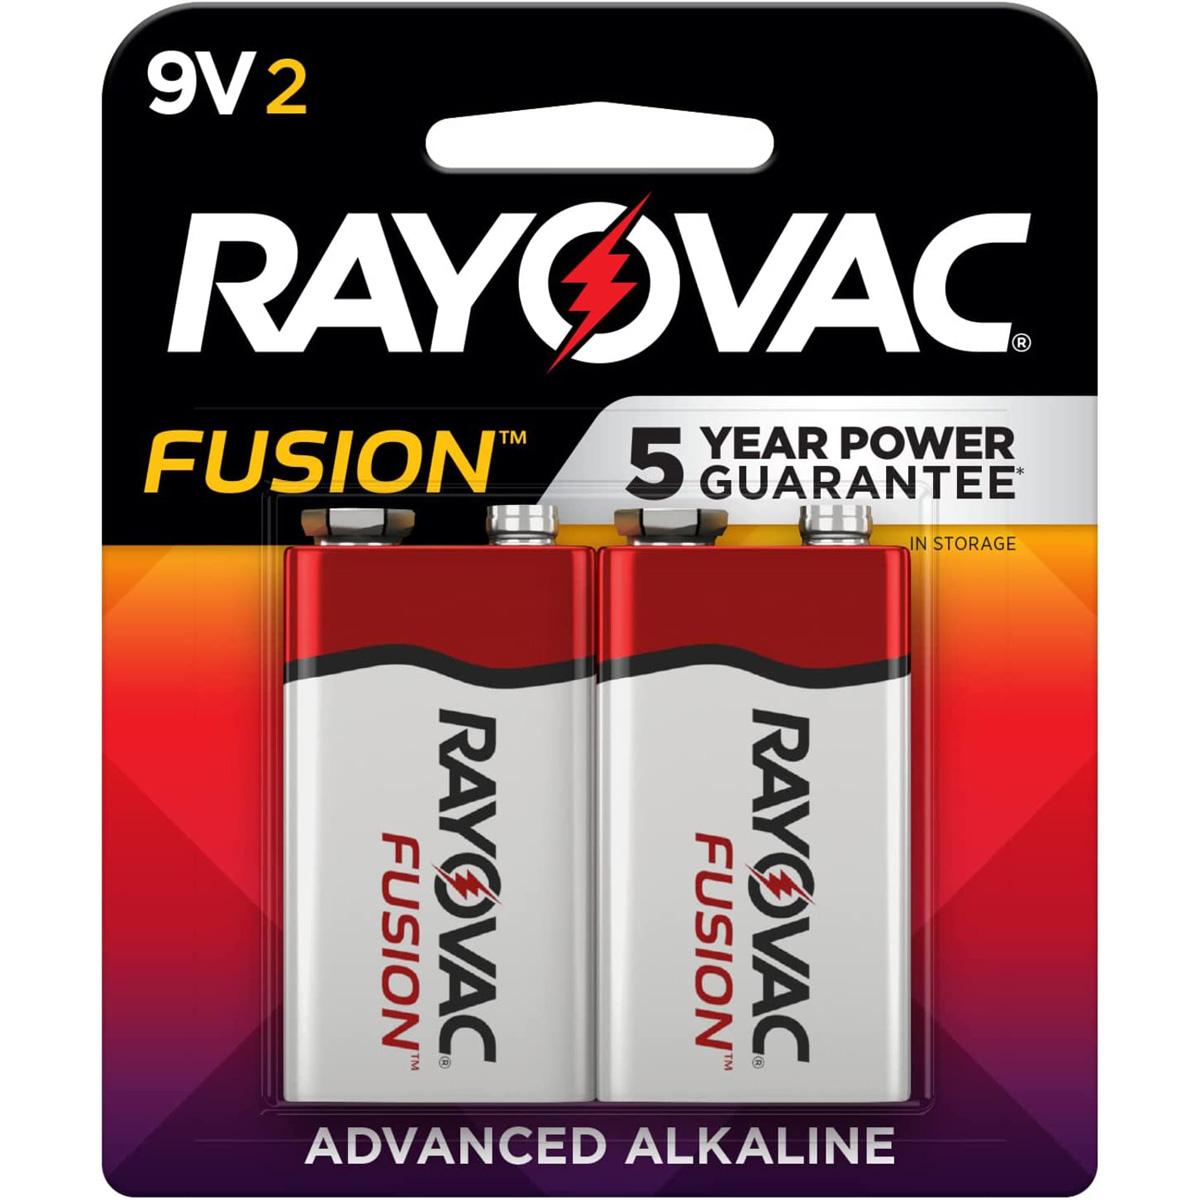 Rayovac Fusion 9V Alkaline Batteries 2 Pack for $2.25 Shipped